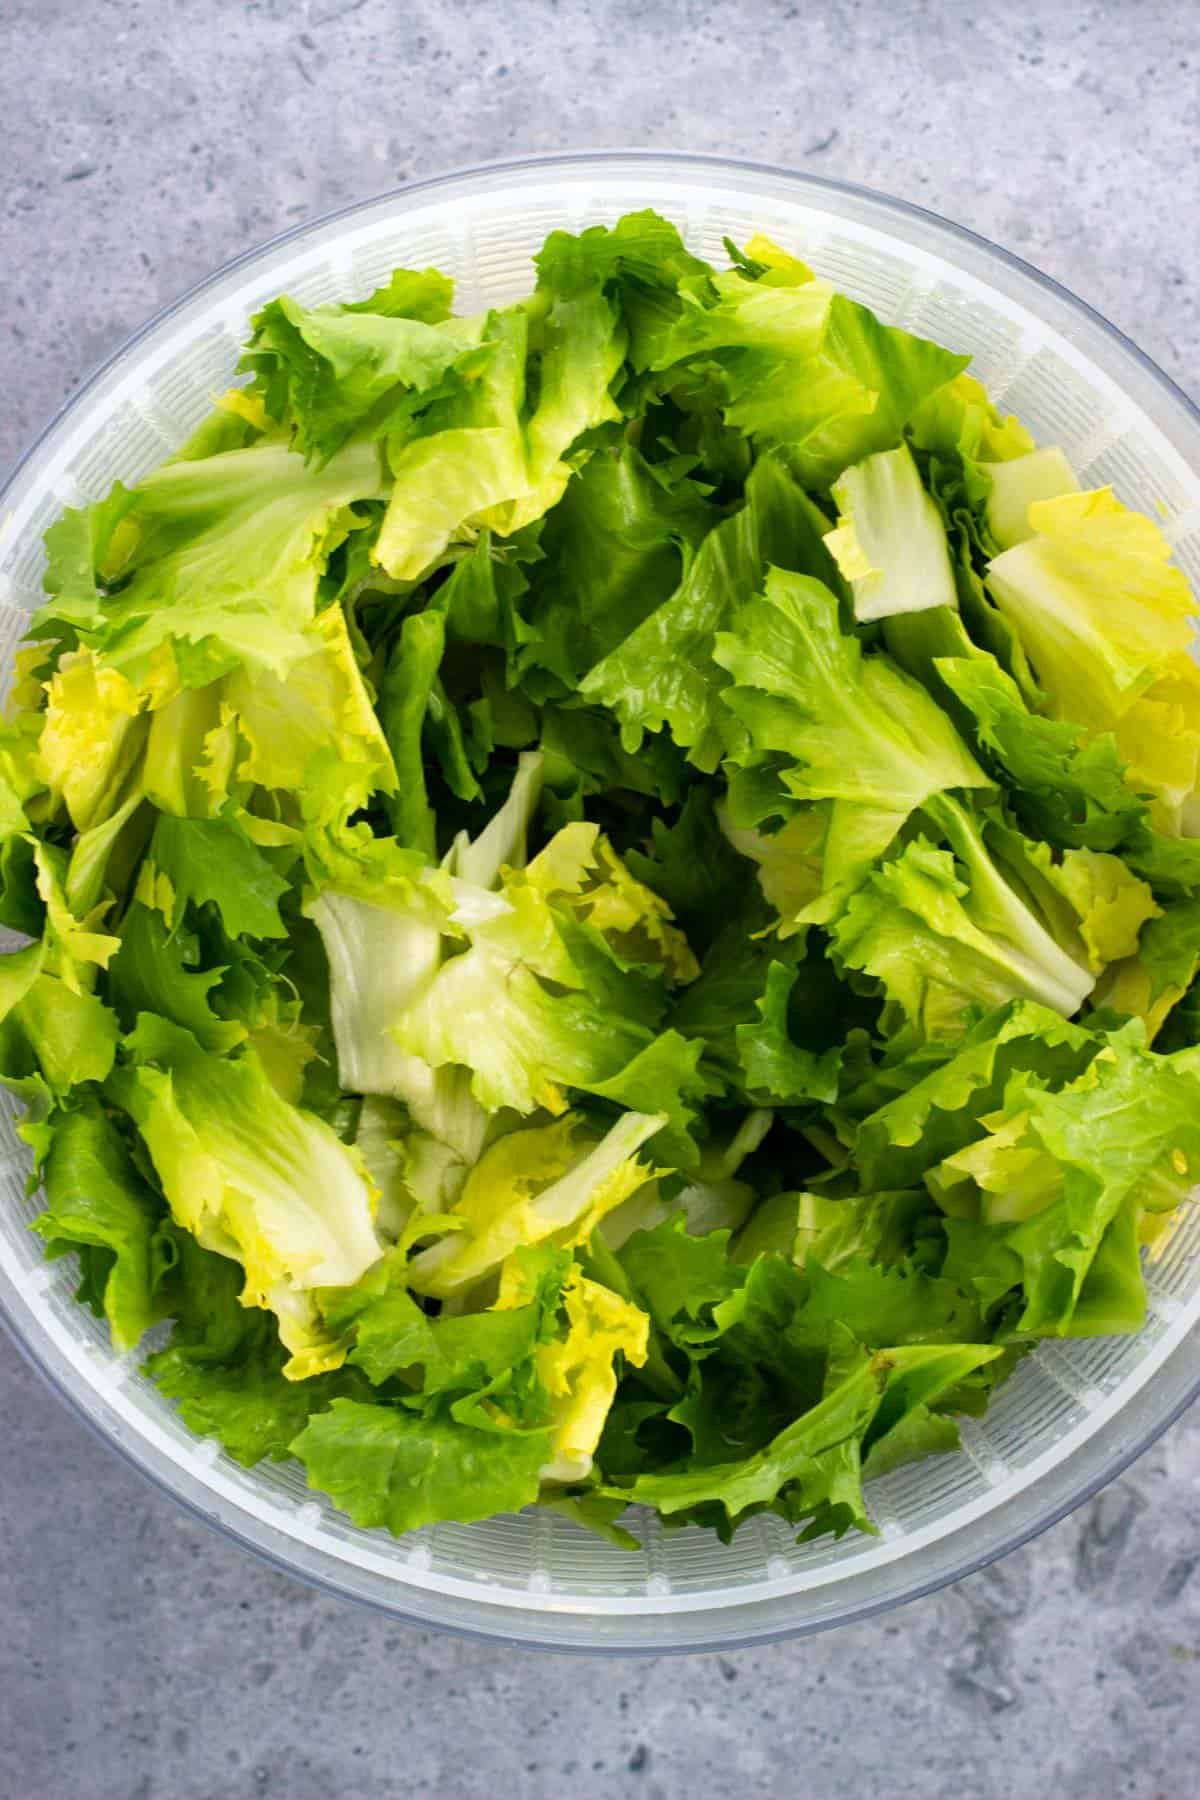 Chopped and rinsed escarole leaves in a salad spinner.